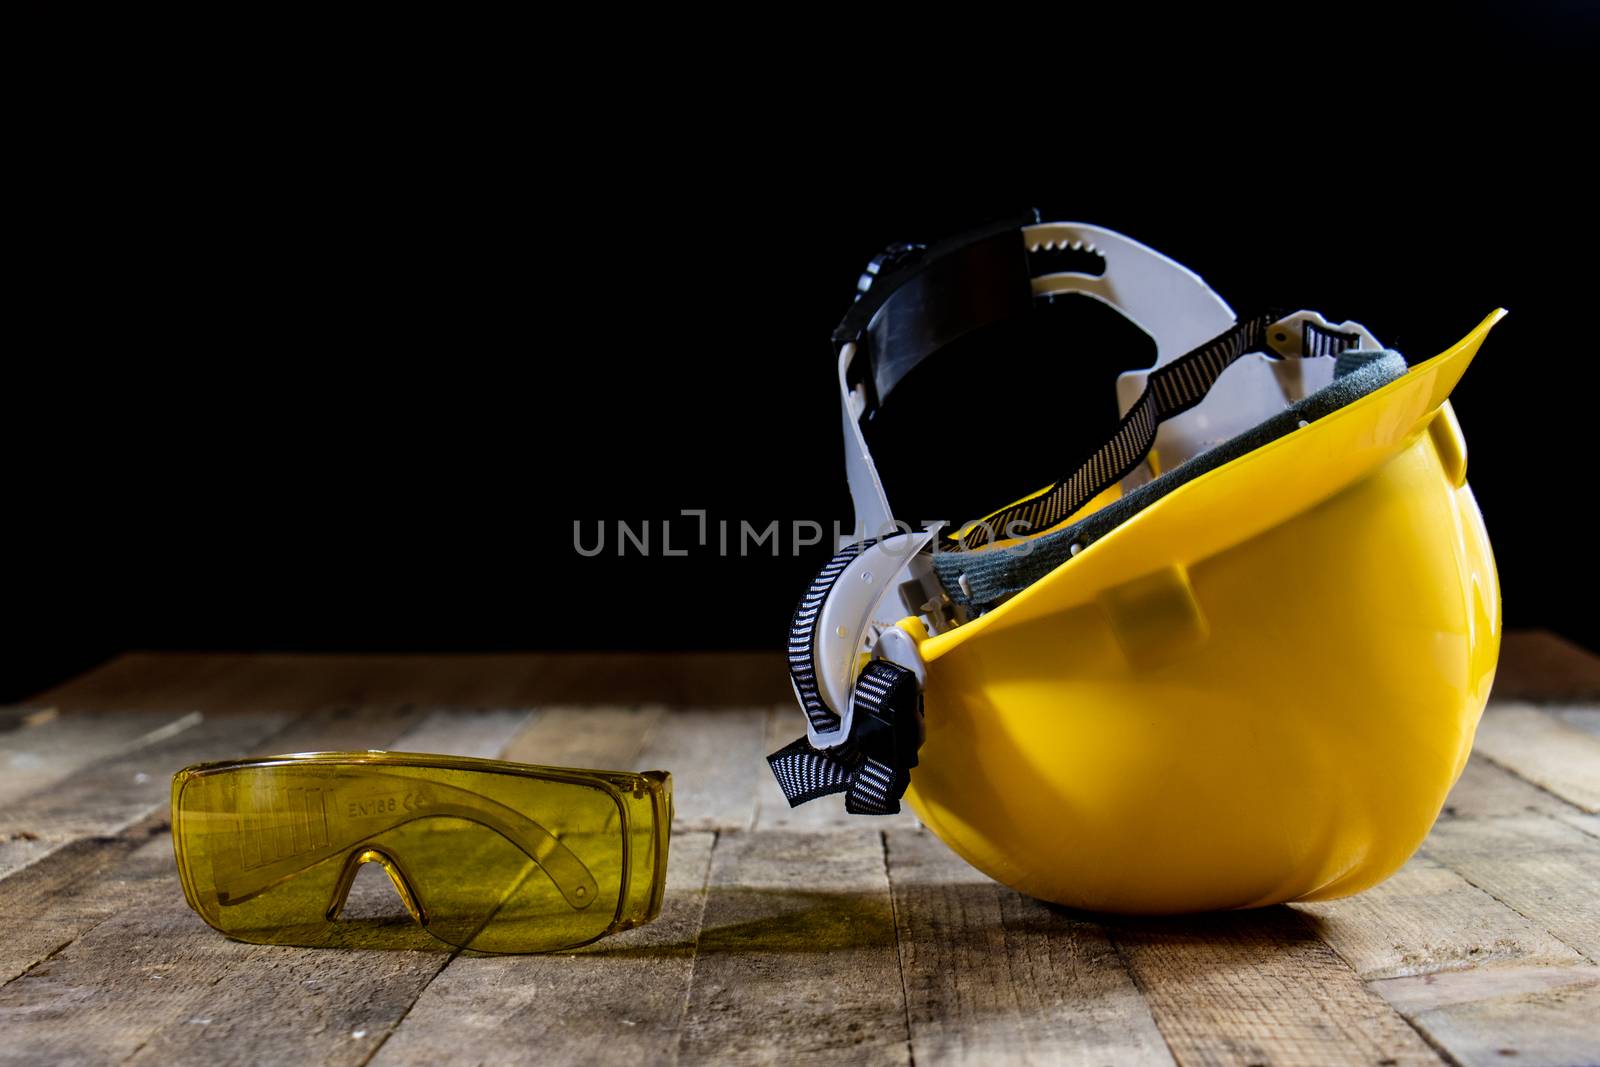 Yellow helmet and welding gloves. Black background and old wooden table.